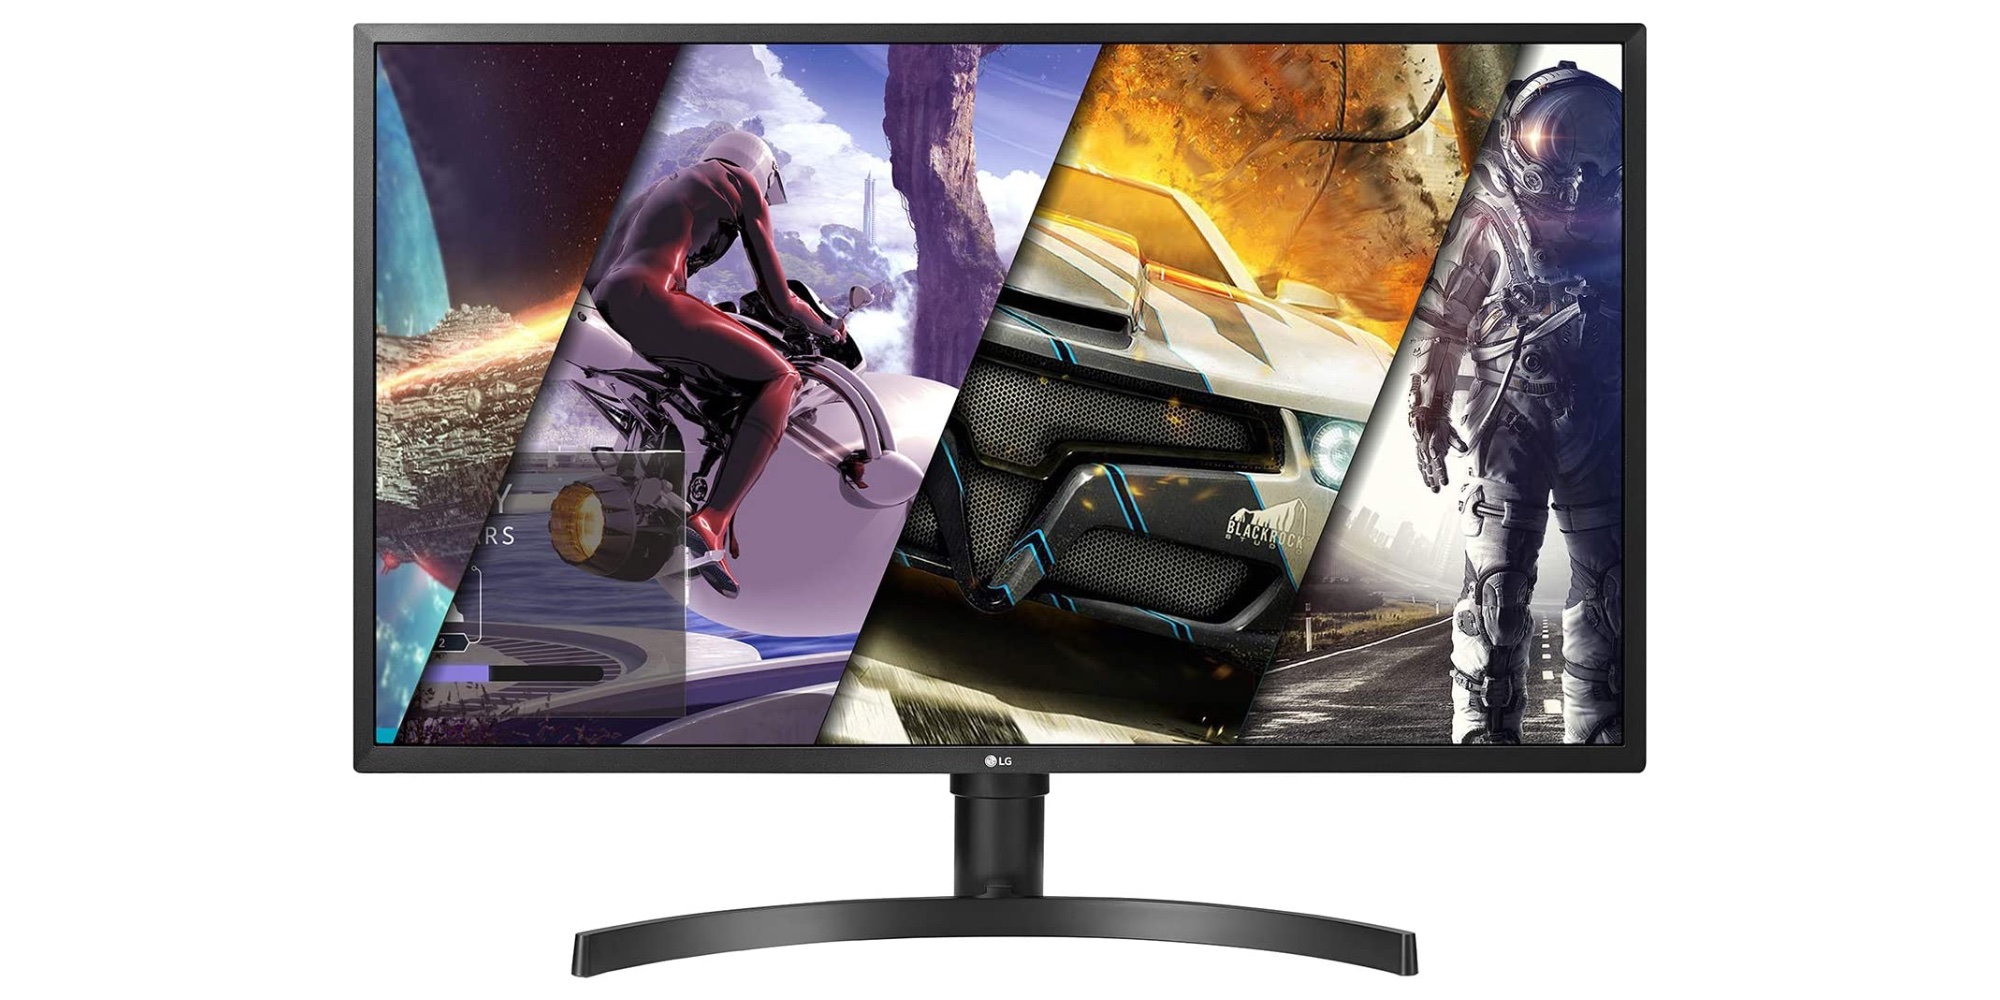 Cozy Best 4K Hdr Gaming Monitor 2020 With Cozy Design